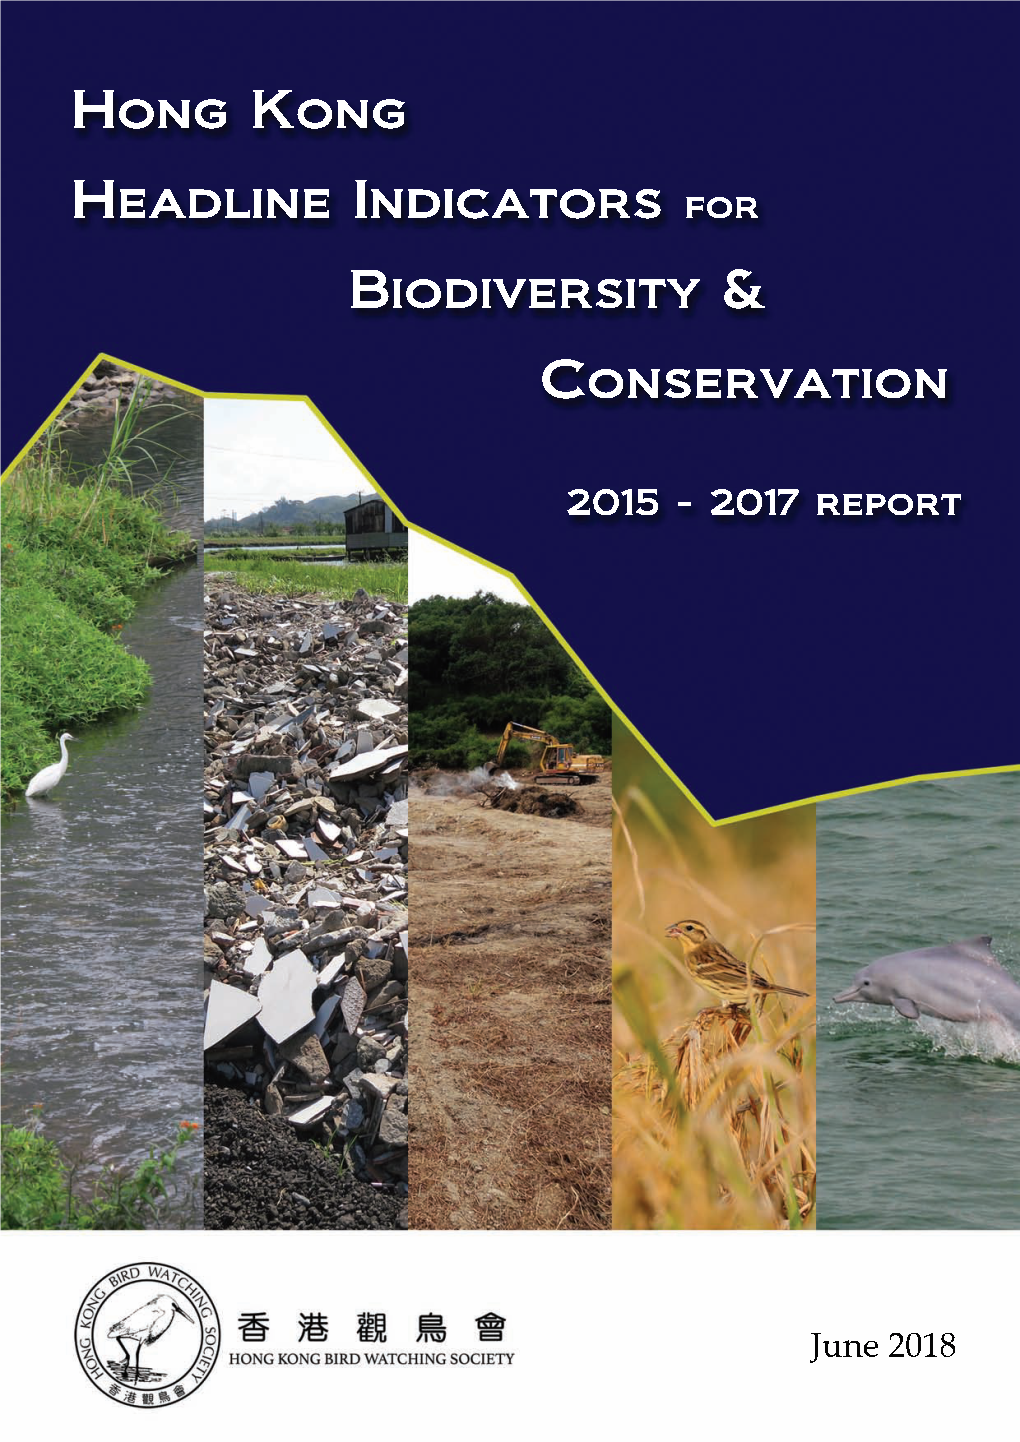 Hong Kong Headline Indicators for Biodiversity and Conservation 2015 - 2017 Report